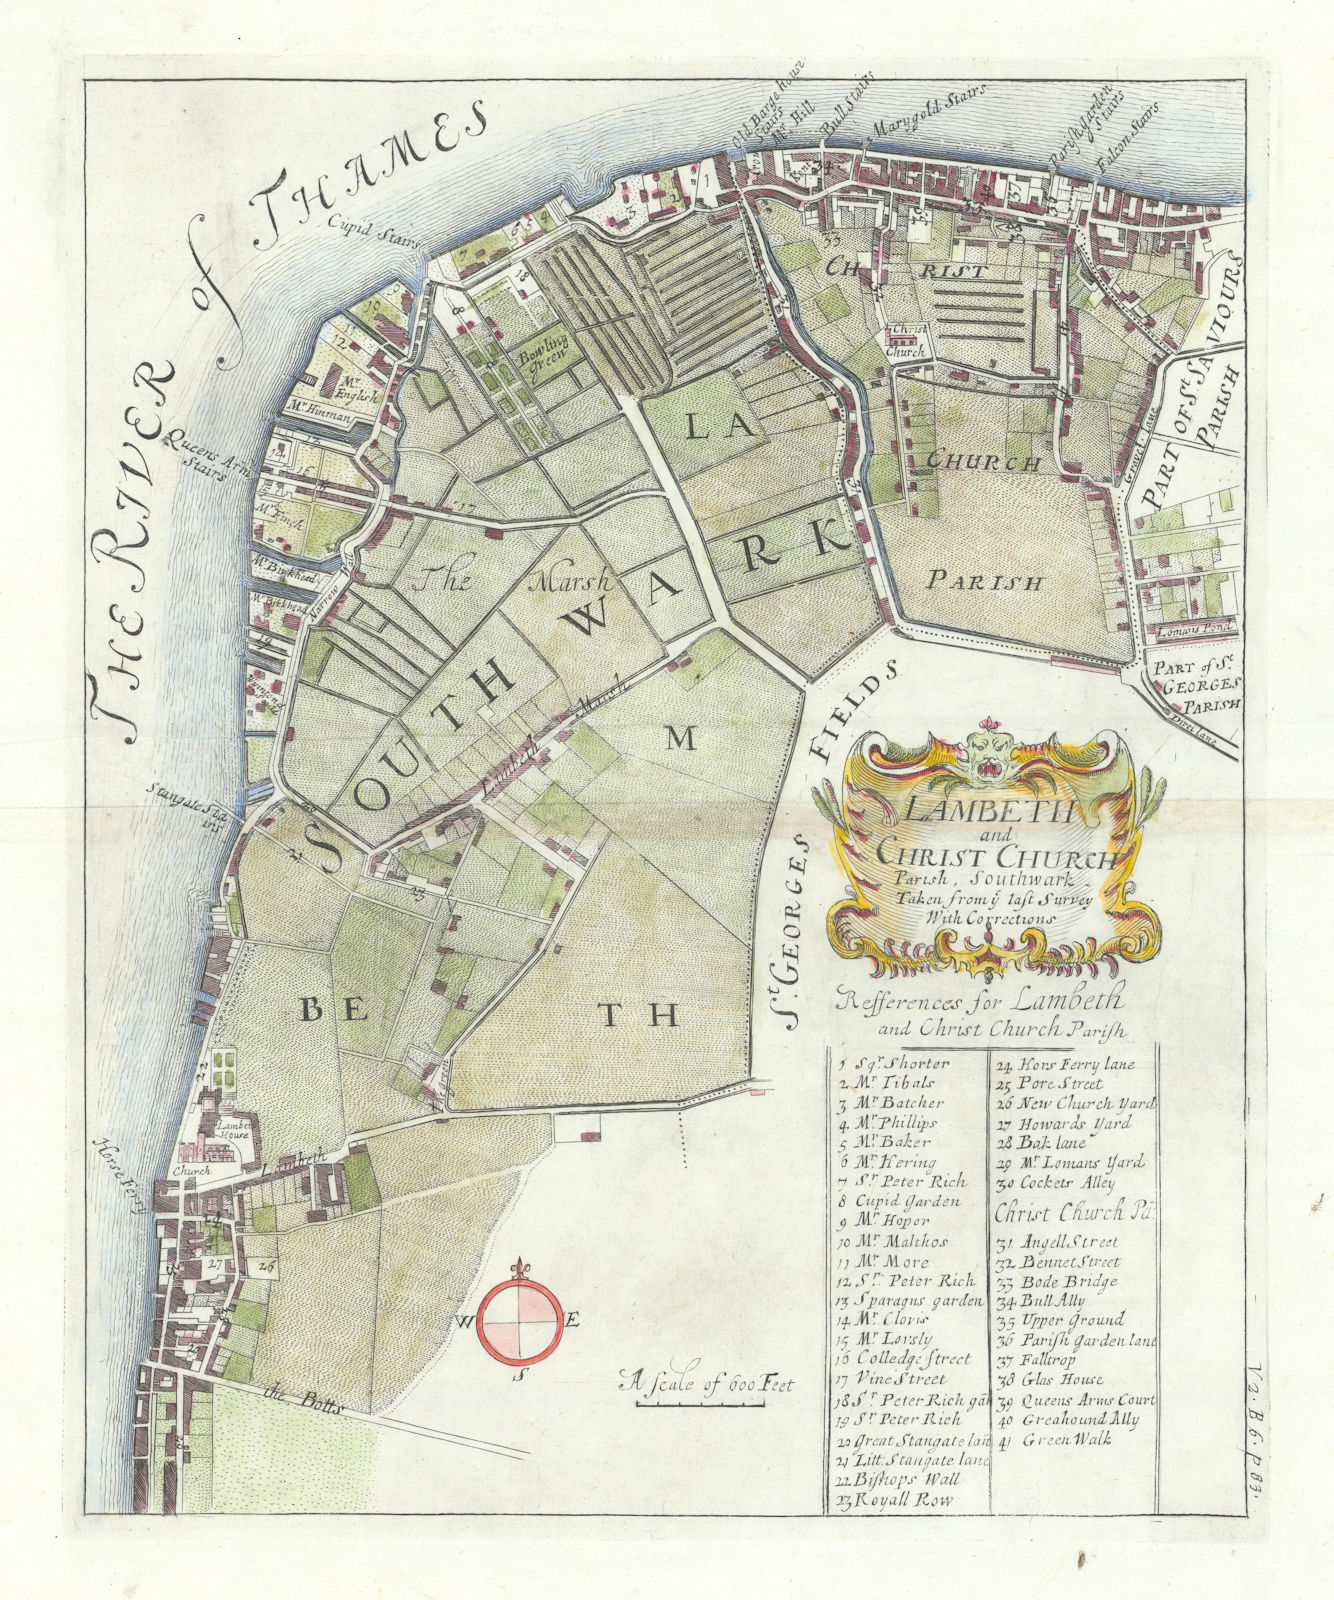 'Lambeth and Christ Church parish, Southwark'. Bankside. STOW/STRYPE 1720 map